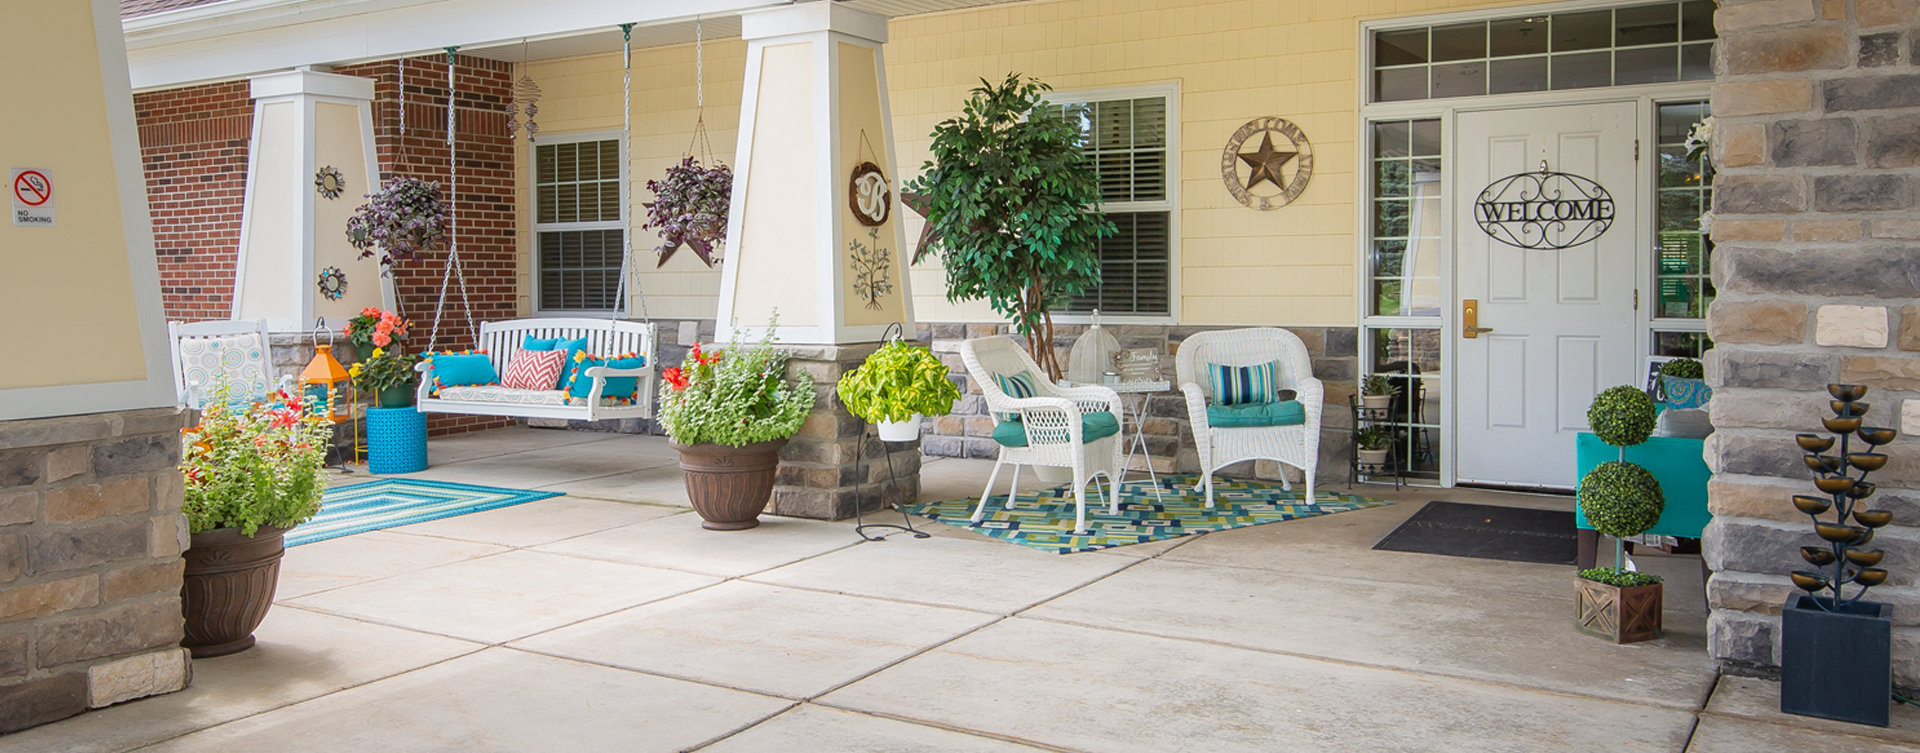 Relax in your favorite chair on the porch at Bickford of Portage